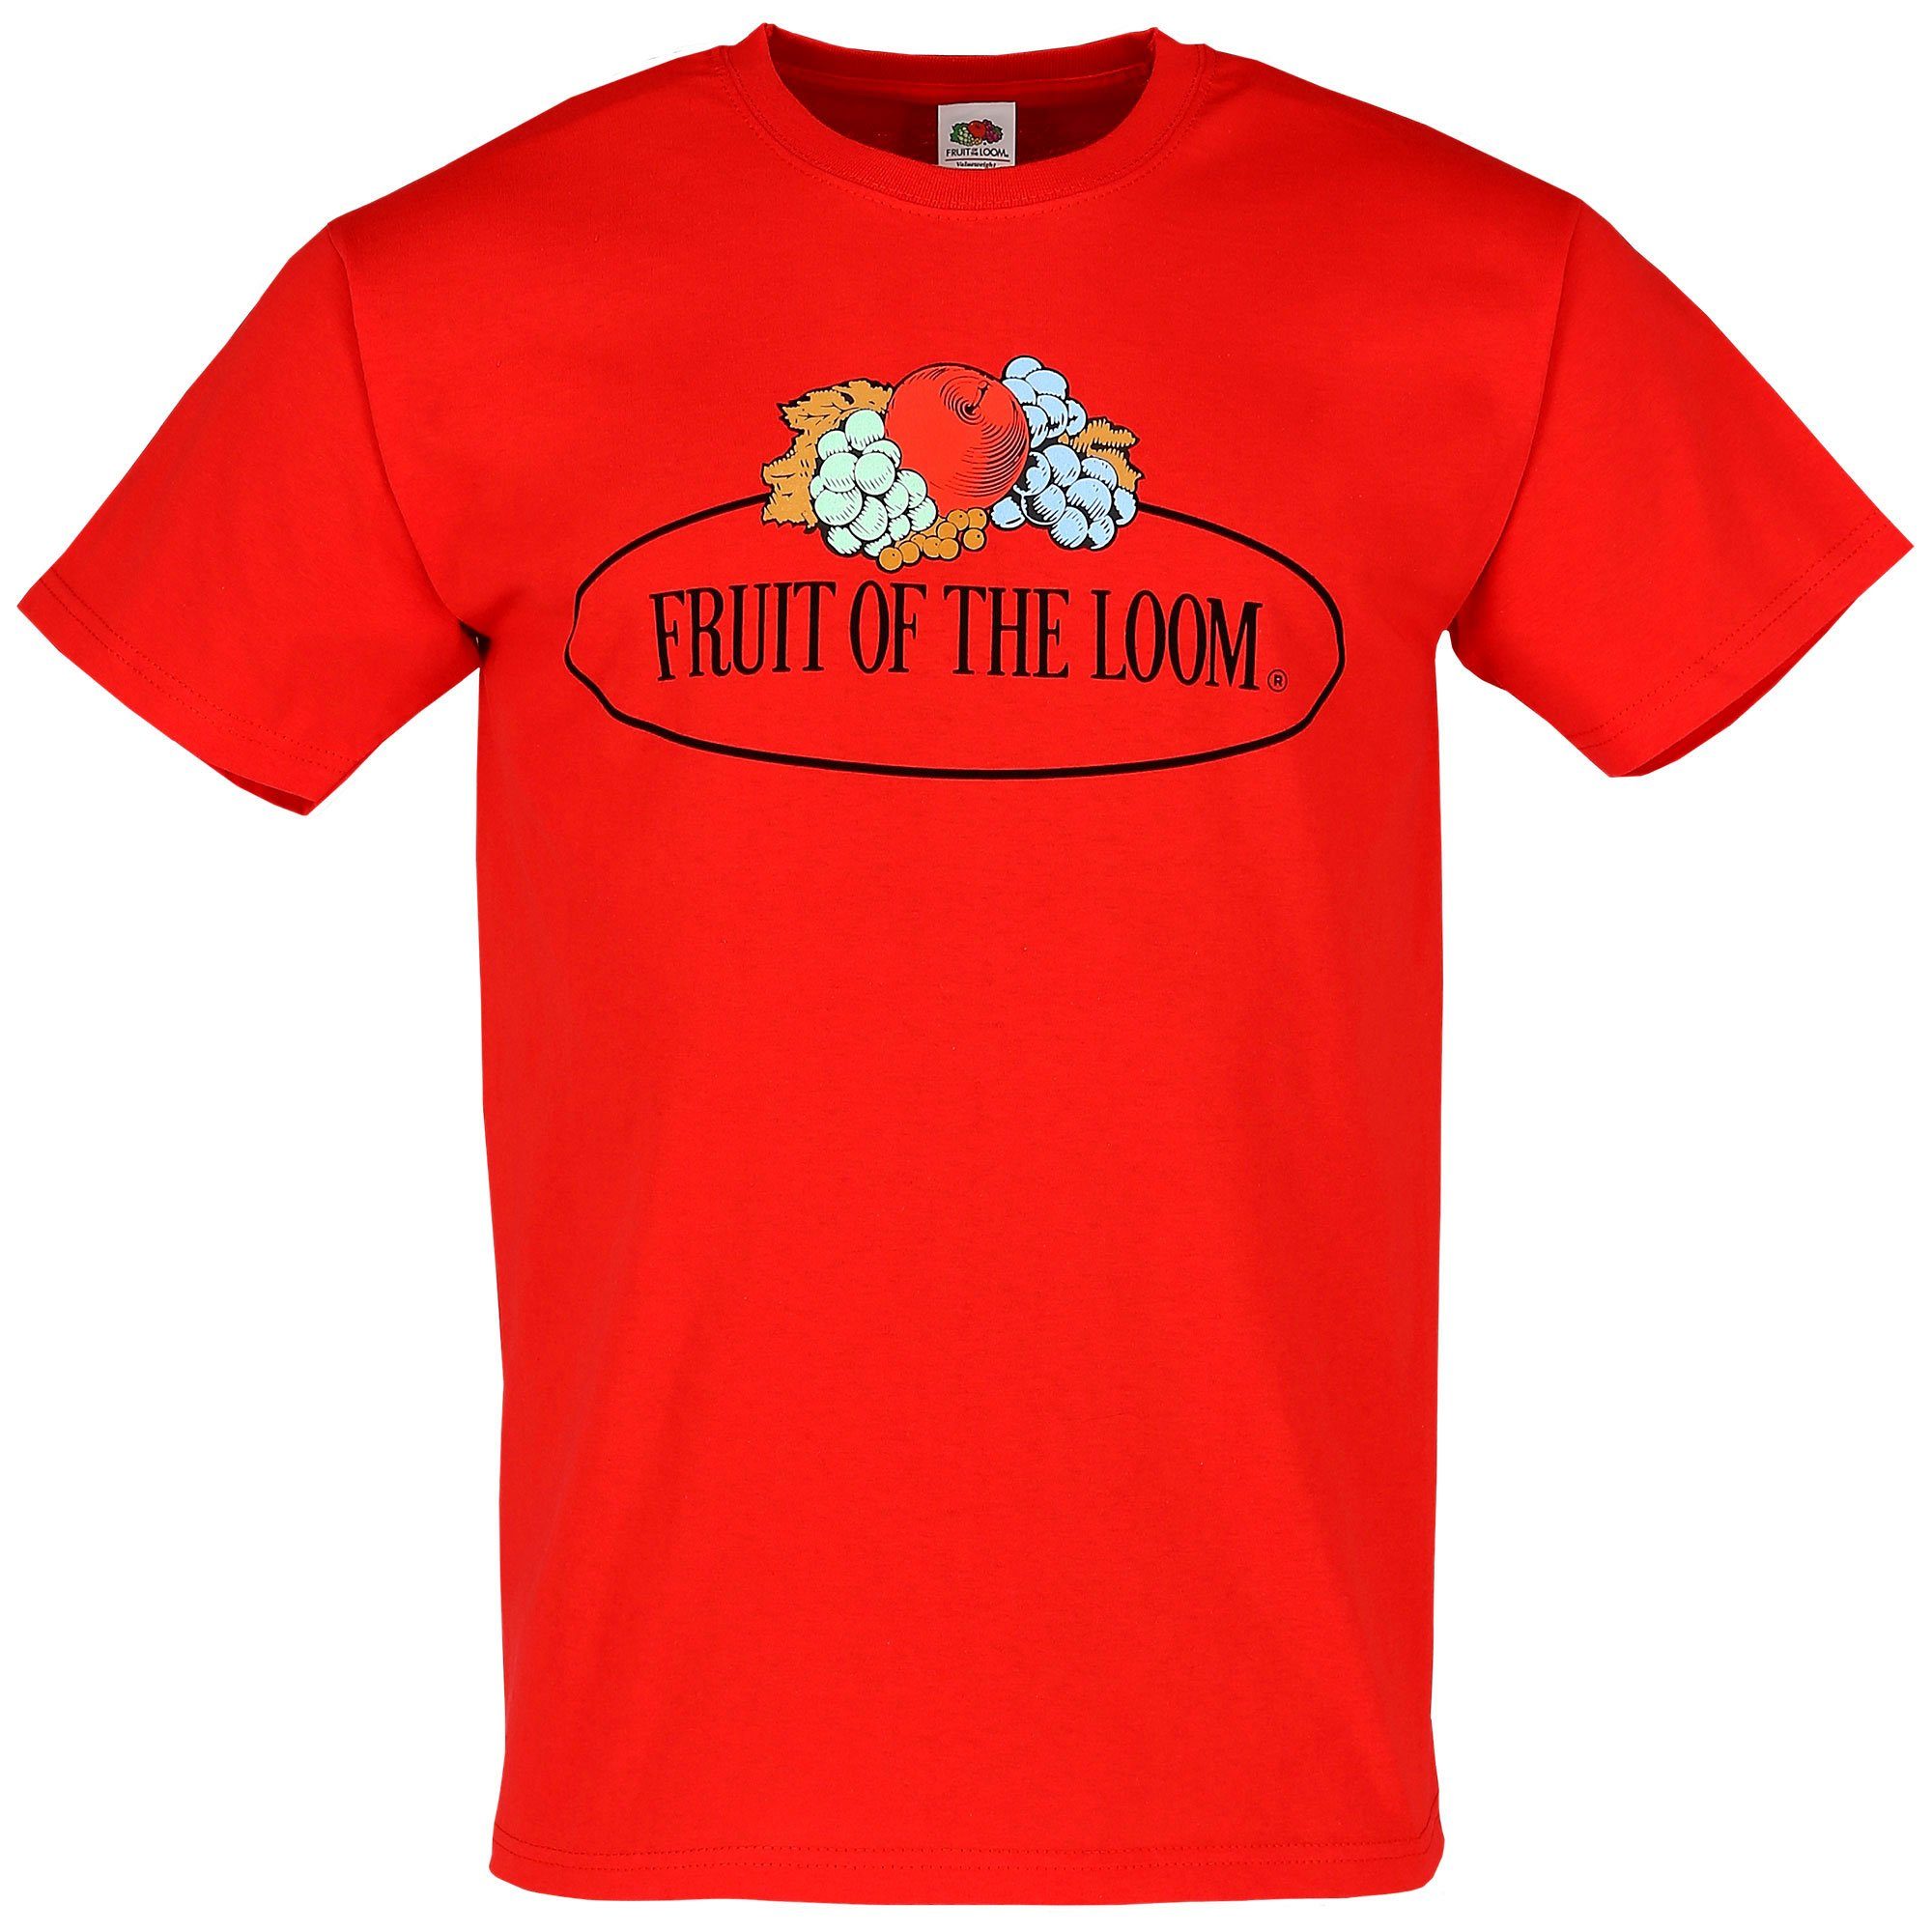 Fruit of the Loom of the Fruit rot Logo Vintage Loom Rundhalsshirt Fruit the Loom of mit T-Shirt